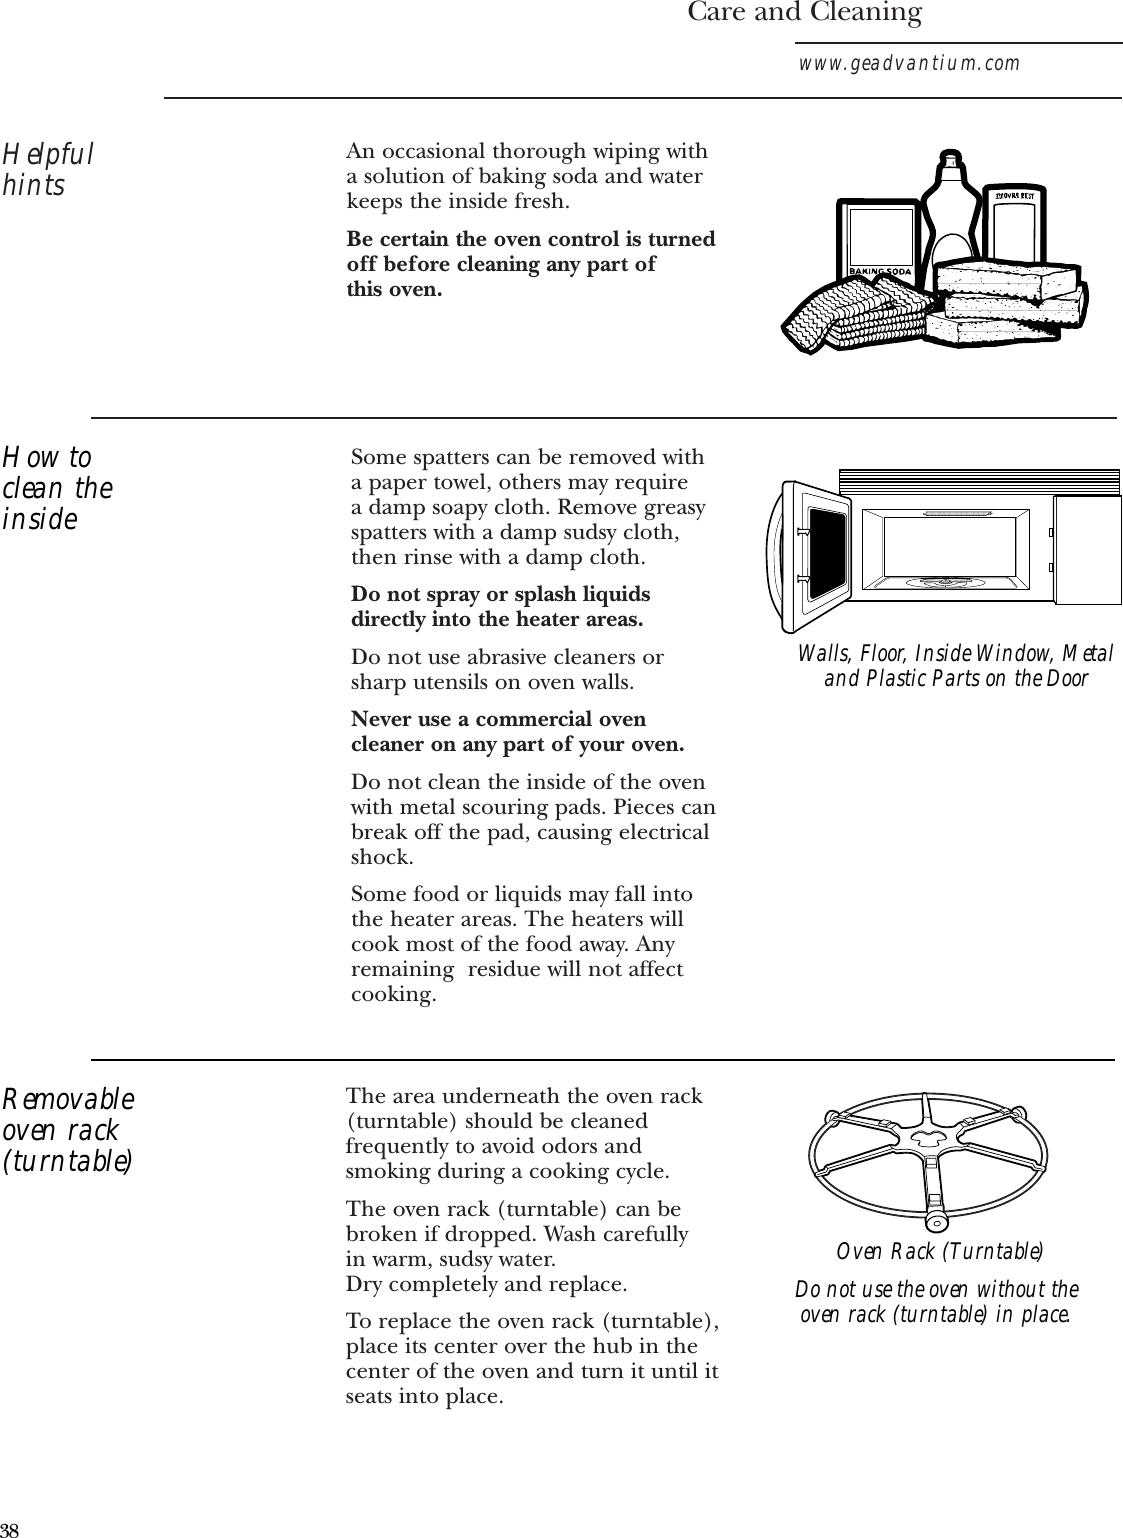 The area underneath the oven rack(turntable) should be cleanedfrequently to avoid odors andsmoking during a cooking cycle. The oven rack (turntable) can bebroken if dropped. Wash carefully in warm, sudsy water. Dry completely and replace. To replace the oven rack (turntable),place its center over the hub in thecenter of the oven and turn it until itseats into place.Care and Cleaningwww.geadvantium.comHelpfulhintsSome spatters can be removed with a paper towel, others may require a damp soapy cloth. Remove greasyspatters with a damp sudsy cloth,then rinse with a damp cloth.Do not spray or splash liquidsdirectly into the heater areas.Do not use abrasive cleaners orsharp utensils on oven walls. Never use a commercial ovencleaner on any part of your oven.Do not clean the inside of the ovenwith metal scouring pads. Pieces canbreak off the pad, causing electricalshock.Some food or liquids may fall intothe heater areas. The heaters willcook most of the food away. Anyremaining  residue will not affectcooking.An occasional thorough wiping witha solution of baking soda and waterkeeps the inside fresh. Be certain the oven control is turnedoff before cleaning any part of this oven.Walls, Floor, Inside Window, Metaland Plastic Parts on the DoorDo not use the oven without theoven rack (turntable) in place.How toclean theinsideRemovableoven rack(turntable)Oven Rack (Turntable)38